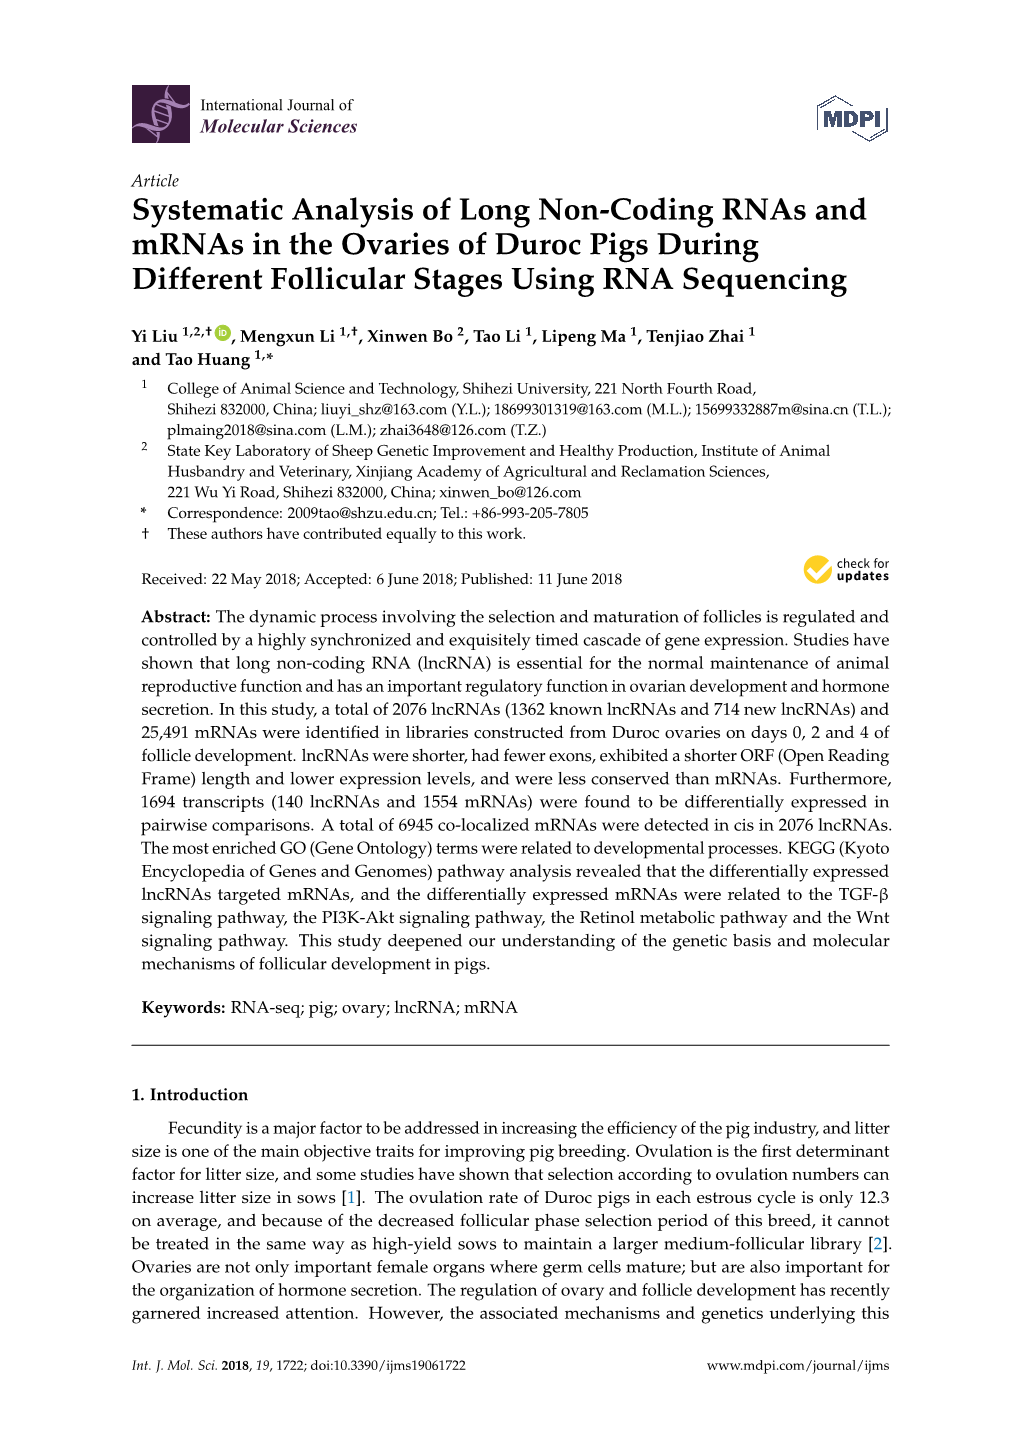 Systematic Analysis of Long Non-Coding Rnas and Mrnas in the Ovaries of Duroc Pigs During Different Follicular Stages Using RNA Sequencing